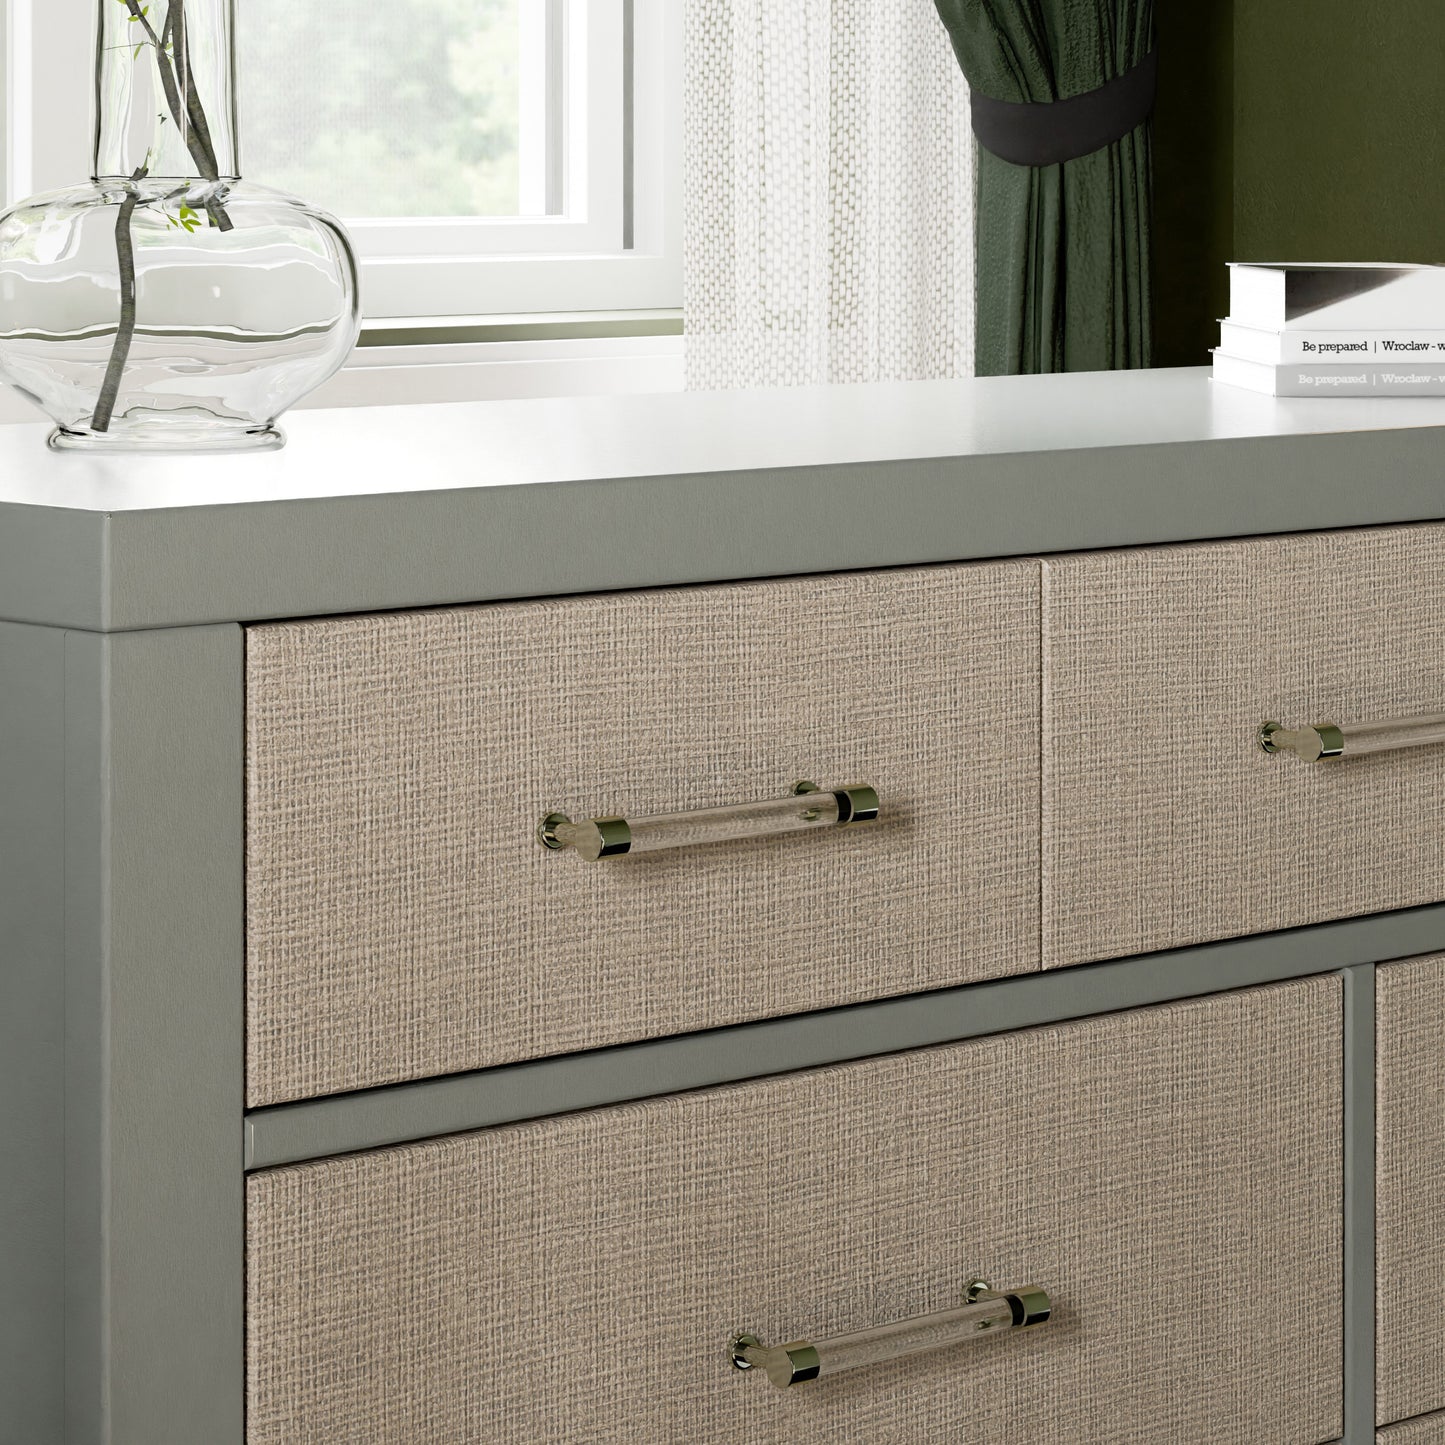 M24816FSPSEW,Eloise 7-Drawer Assembled Dresser in French Sage and Performance Sand Eco-Weave